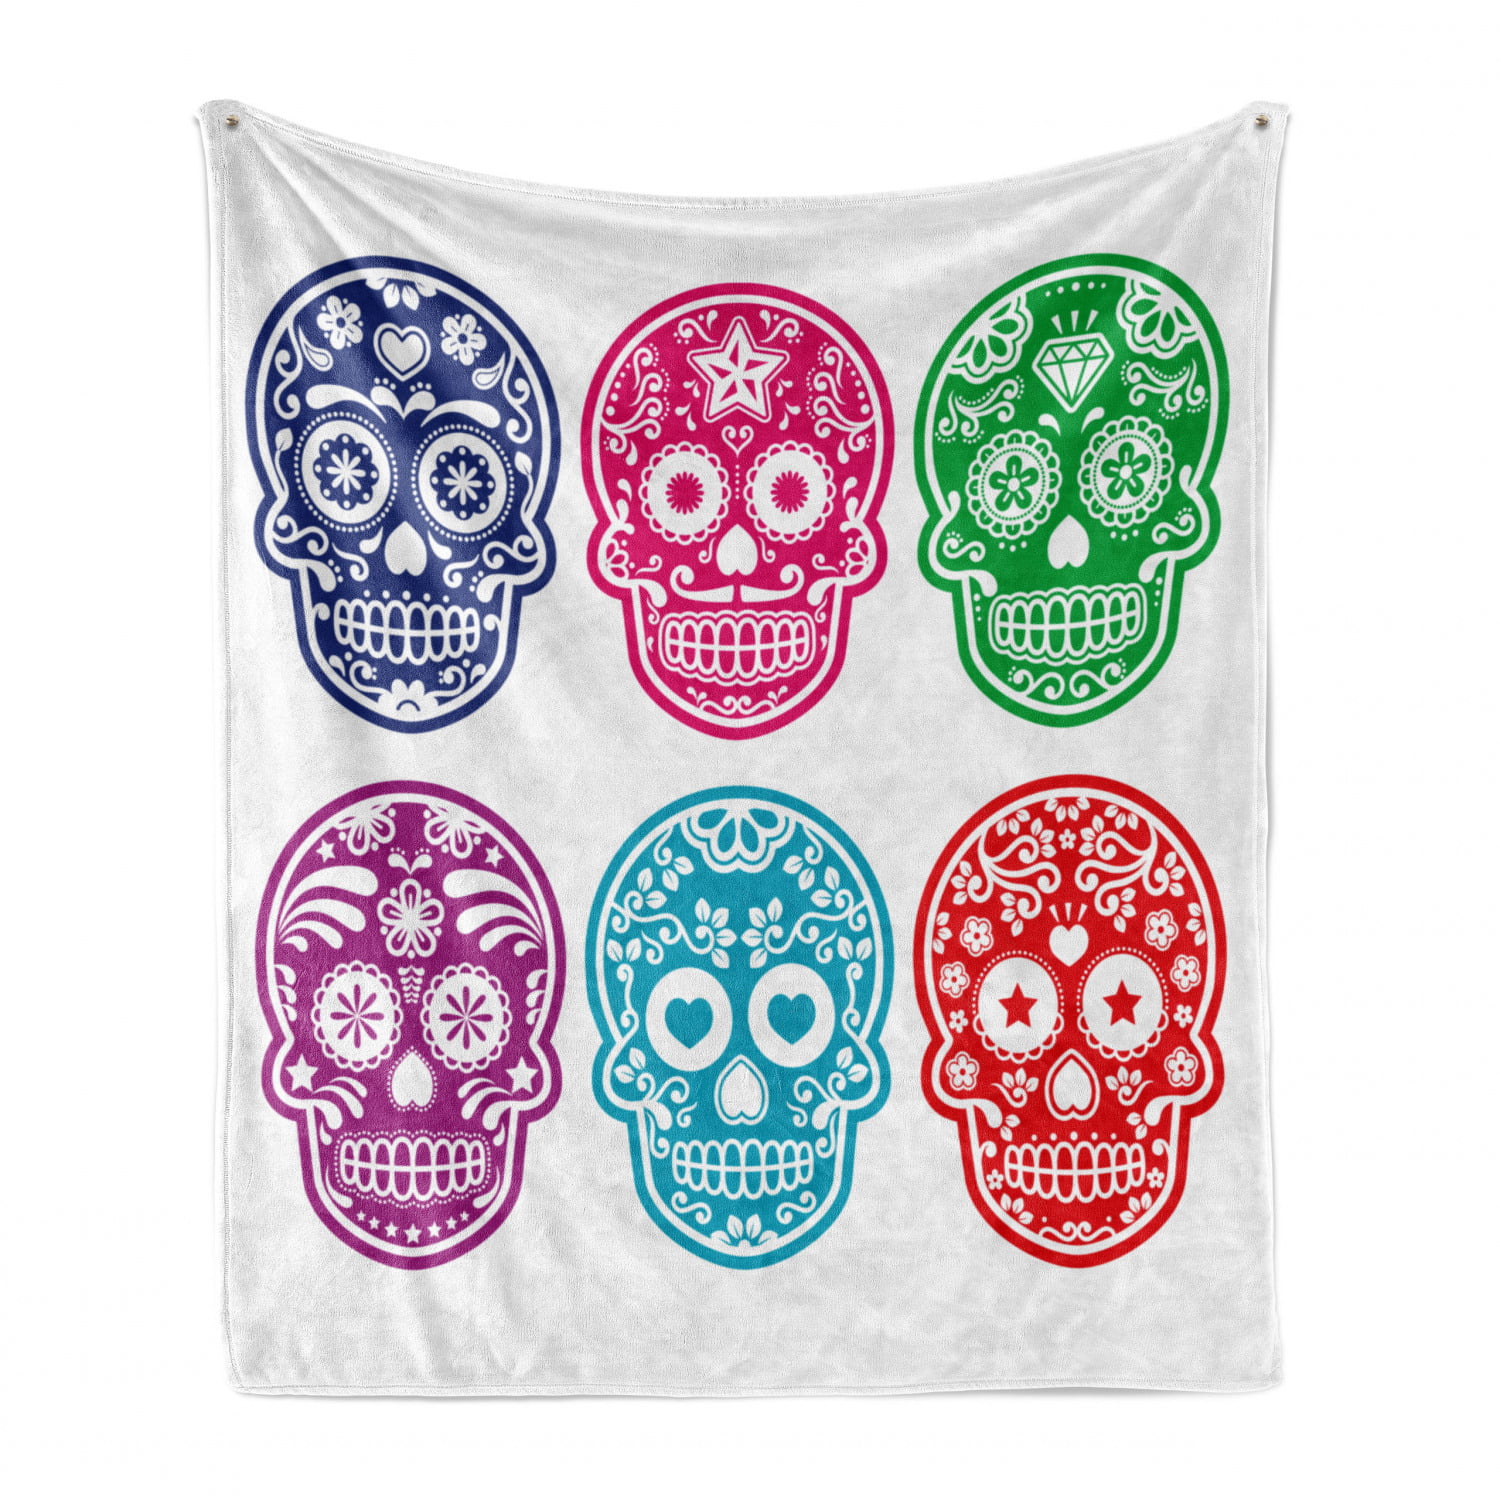 Scared Floral Skull Blanket Throws Lightweight Ultra-Soft Micro Fleece Throw Blankets Fit Couch Bed Sofa Chair 60X50 